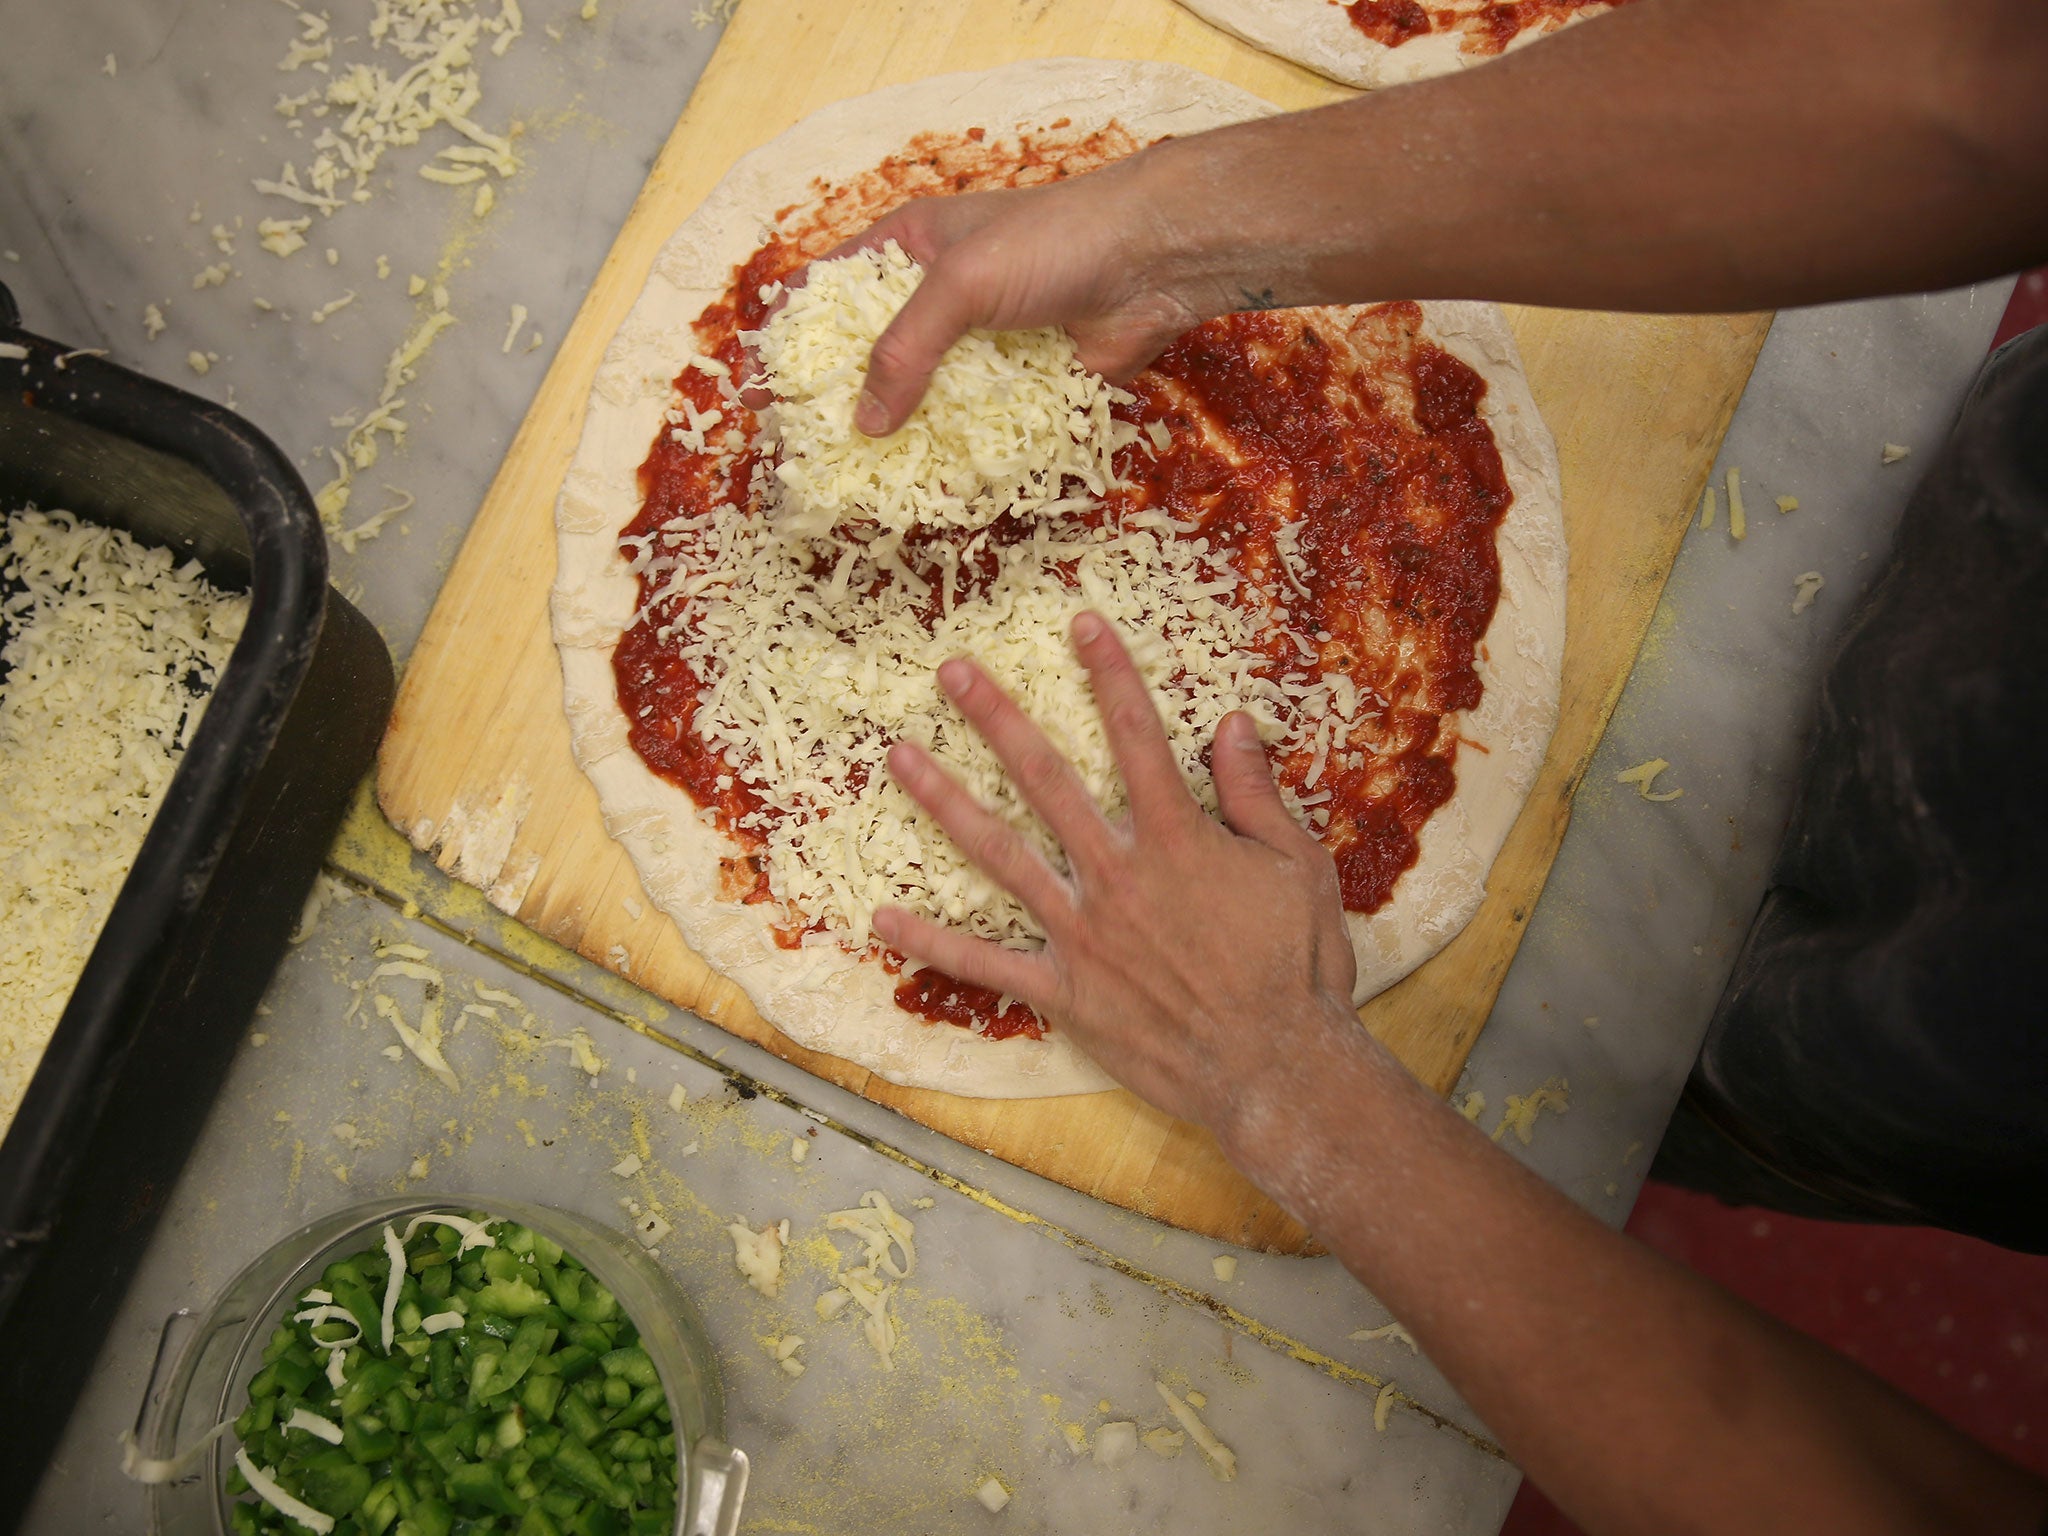 A chef sprinkles cheese onto a pizza